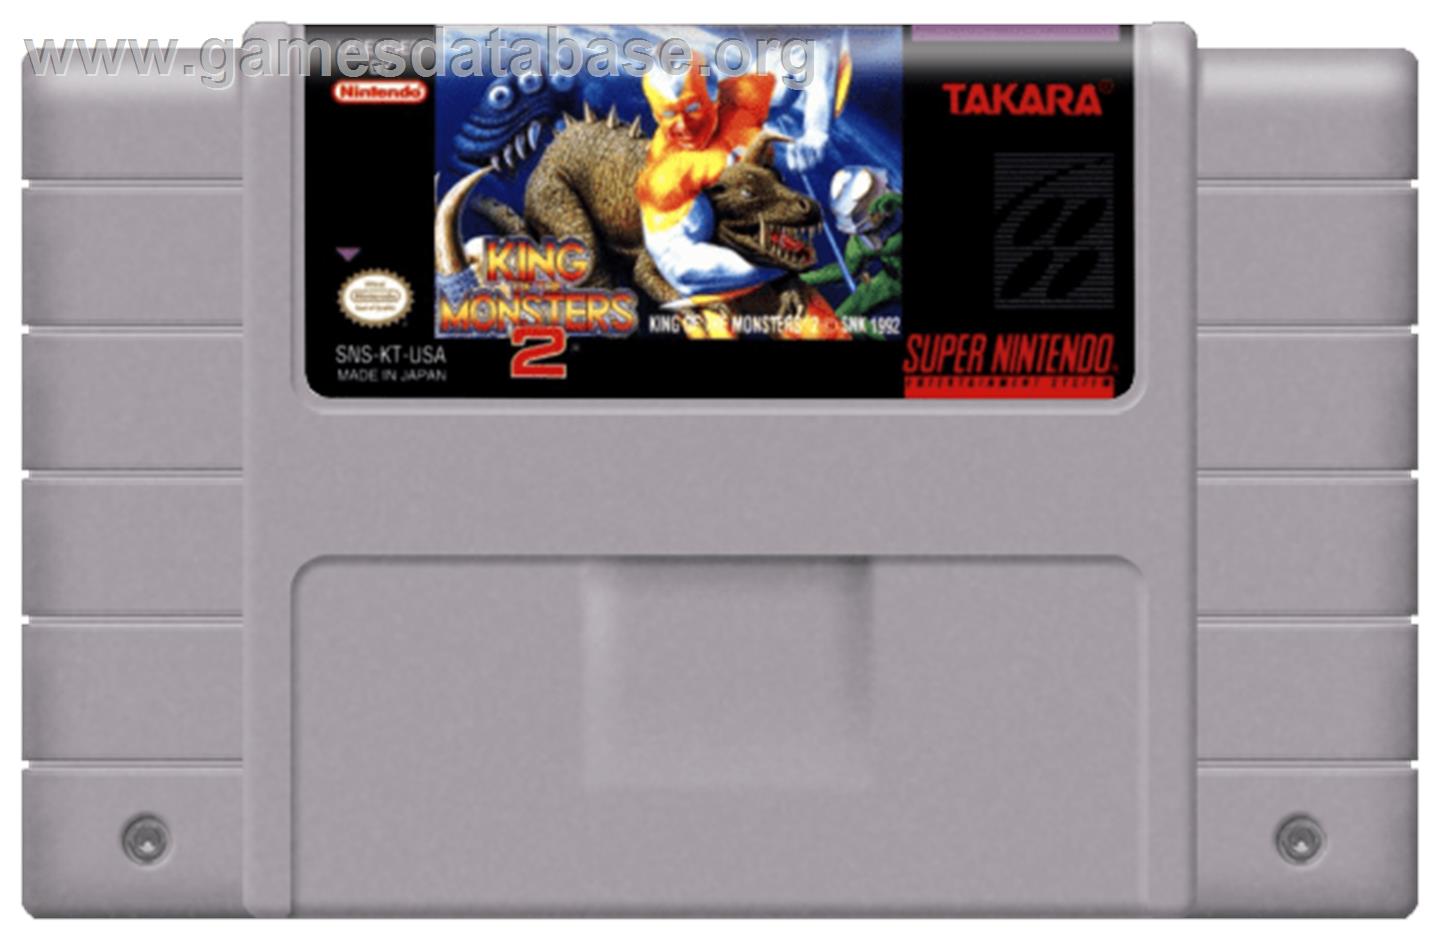 King of the Monsters 2: The Next Thing - Nintendo SNES - Artwork - Cartridge